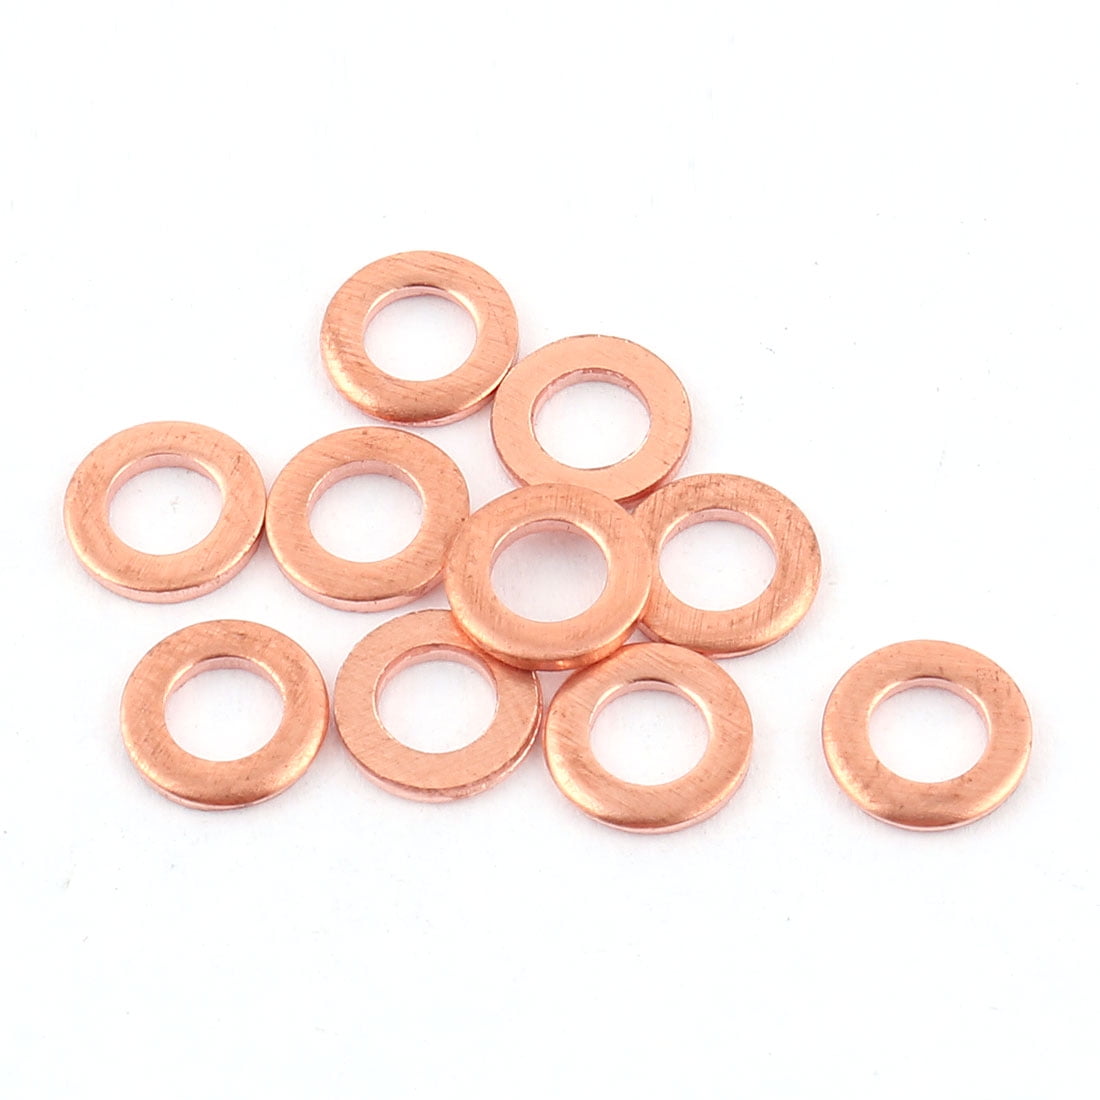 20X USA CF25 Brass Flat Washer Gasket Copper Crush Washer Seal Ring High Quality 